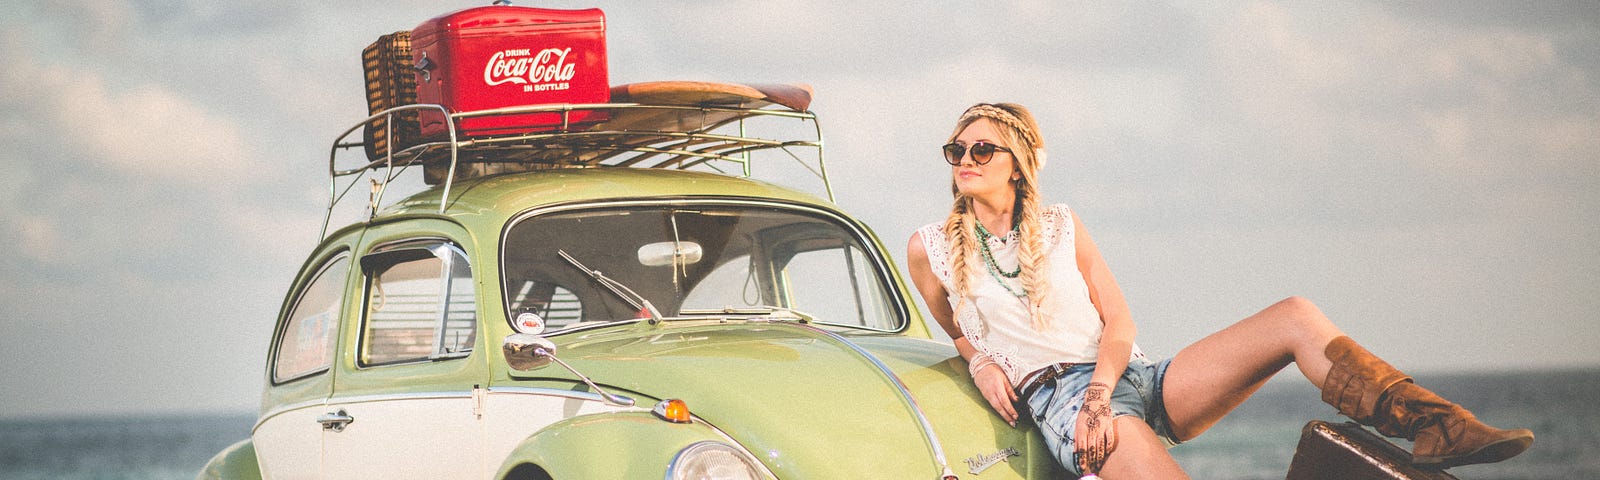 A blond woman with braids and sunglasses, one foot on a suitcase, leaning against an old VW bug, with a surfboard and boxes of Coke on the luggage rack. The ocean is in the background.